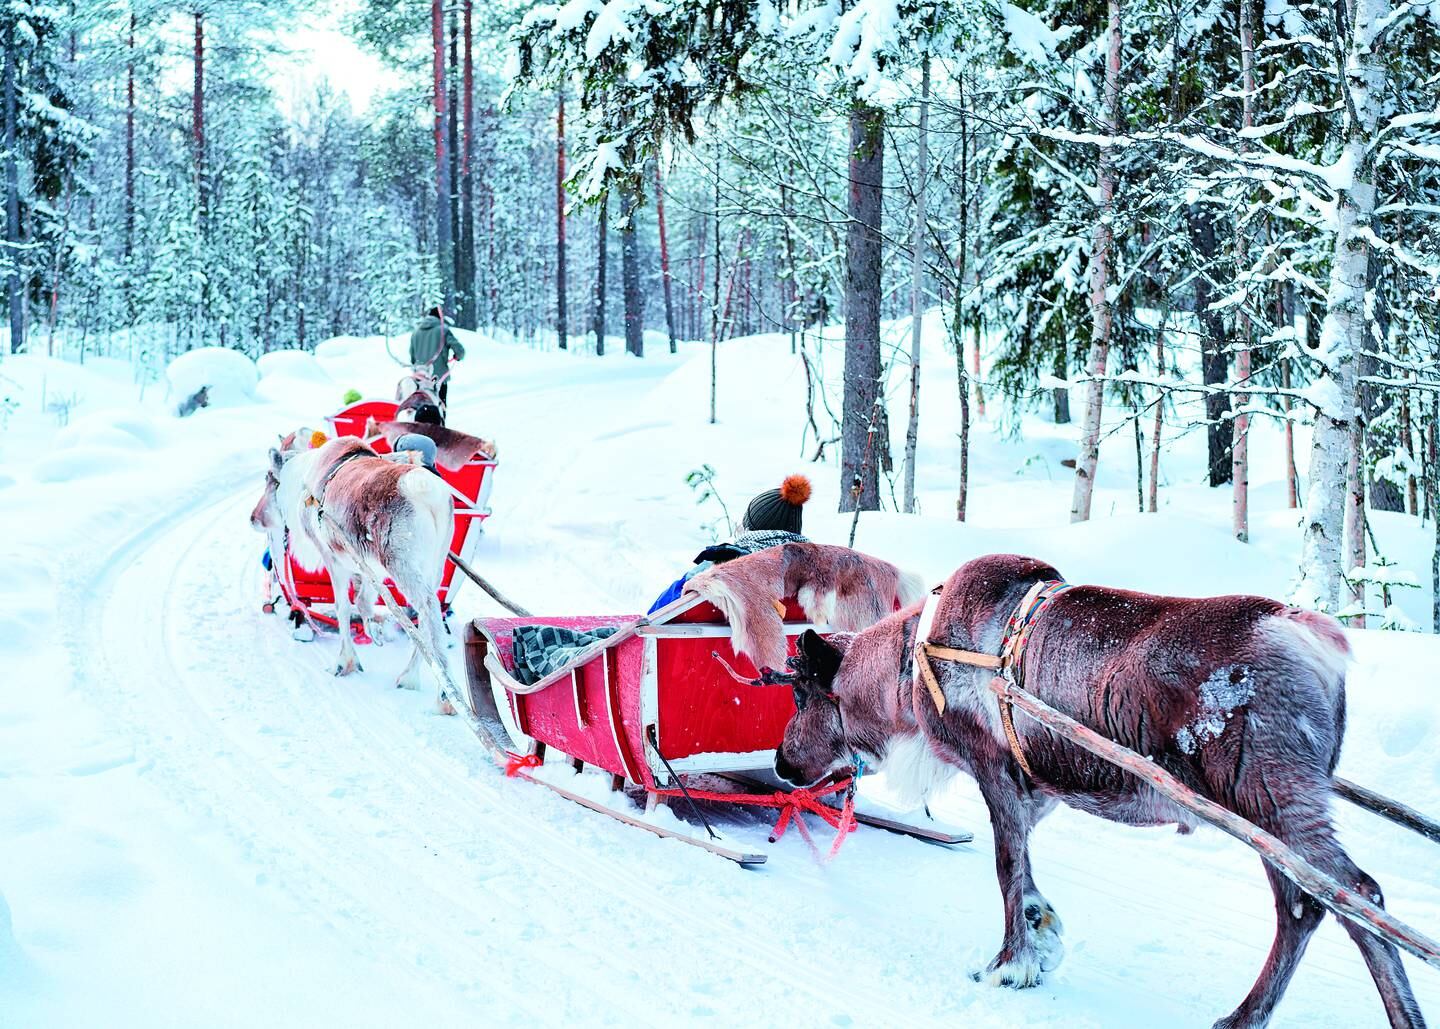 Santa's Lapland has implemented new safety rules including a socially-distanced Santa and sanitised reindeer sleigh rides. Photo: TUI